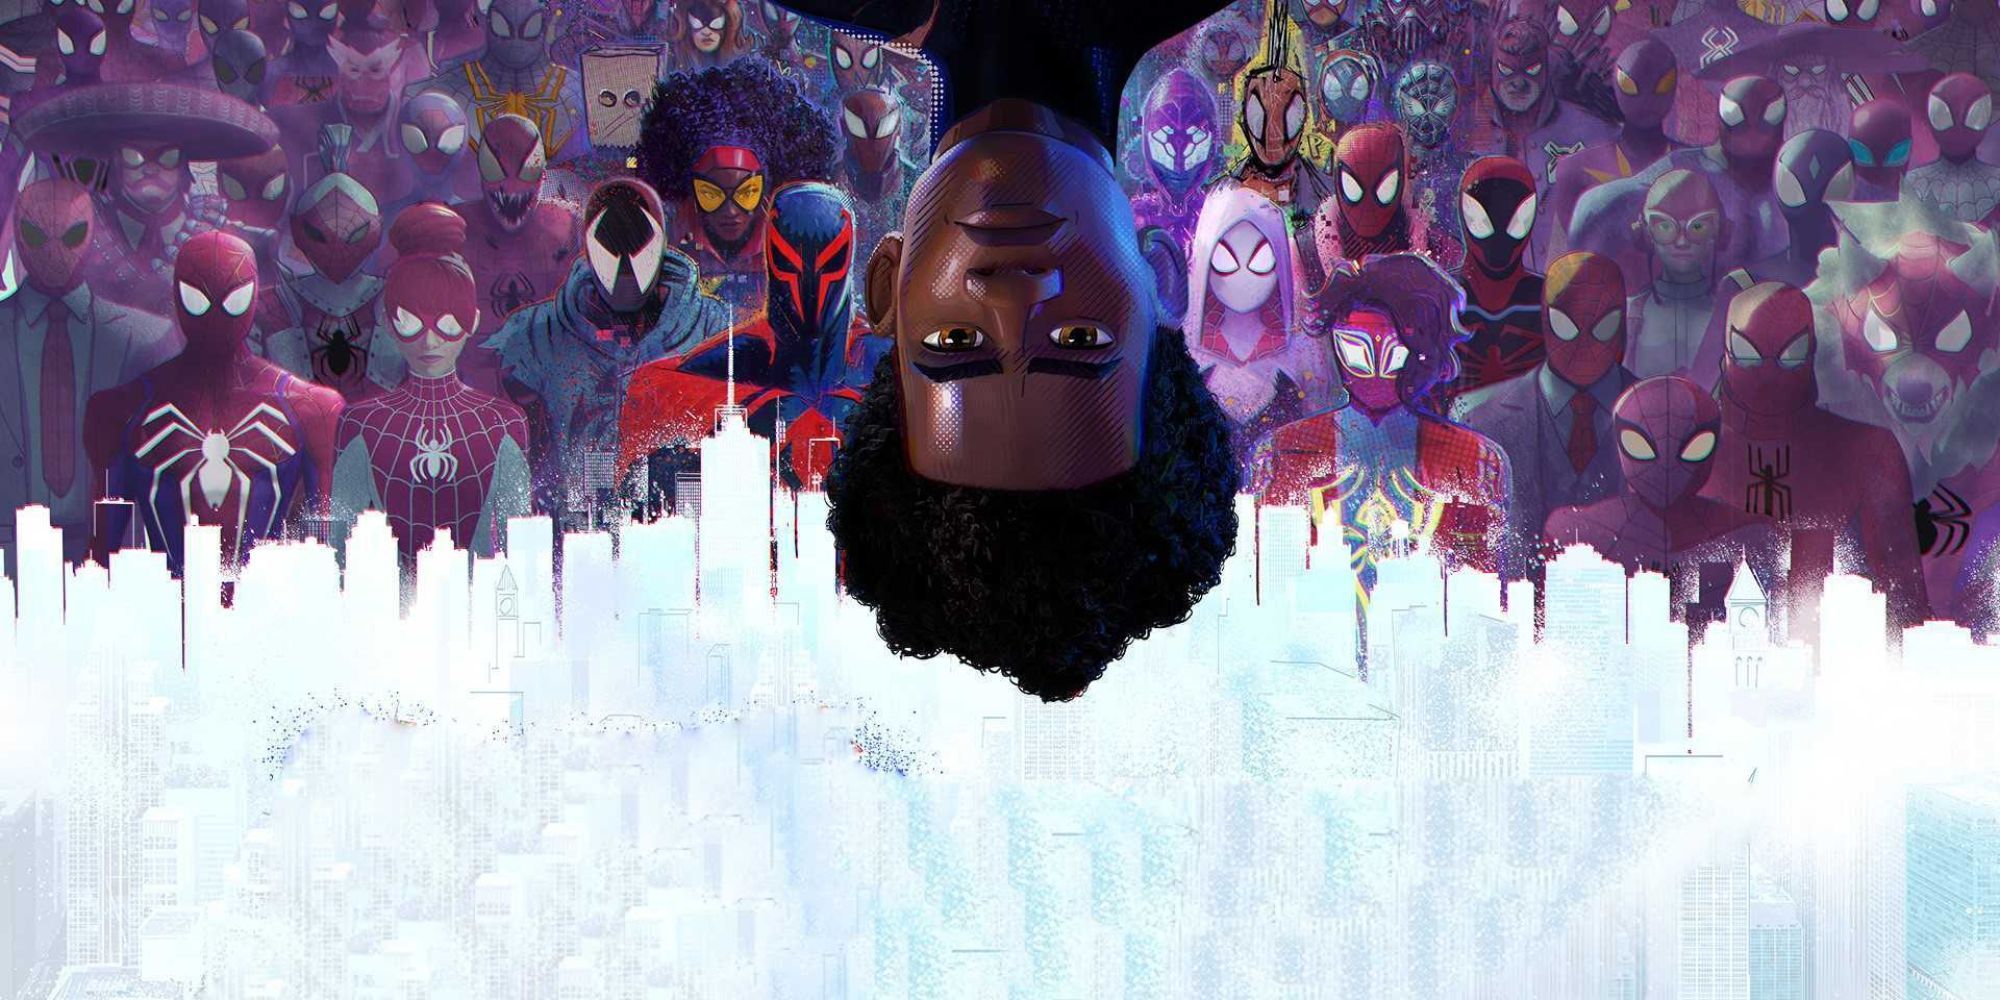 An extended poster for Across the Spider-Verse.